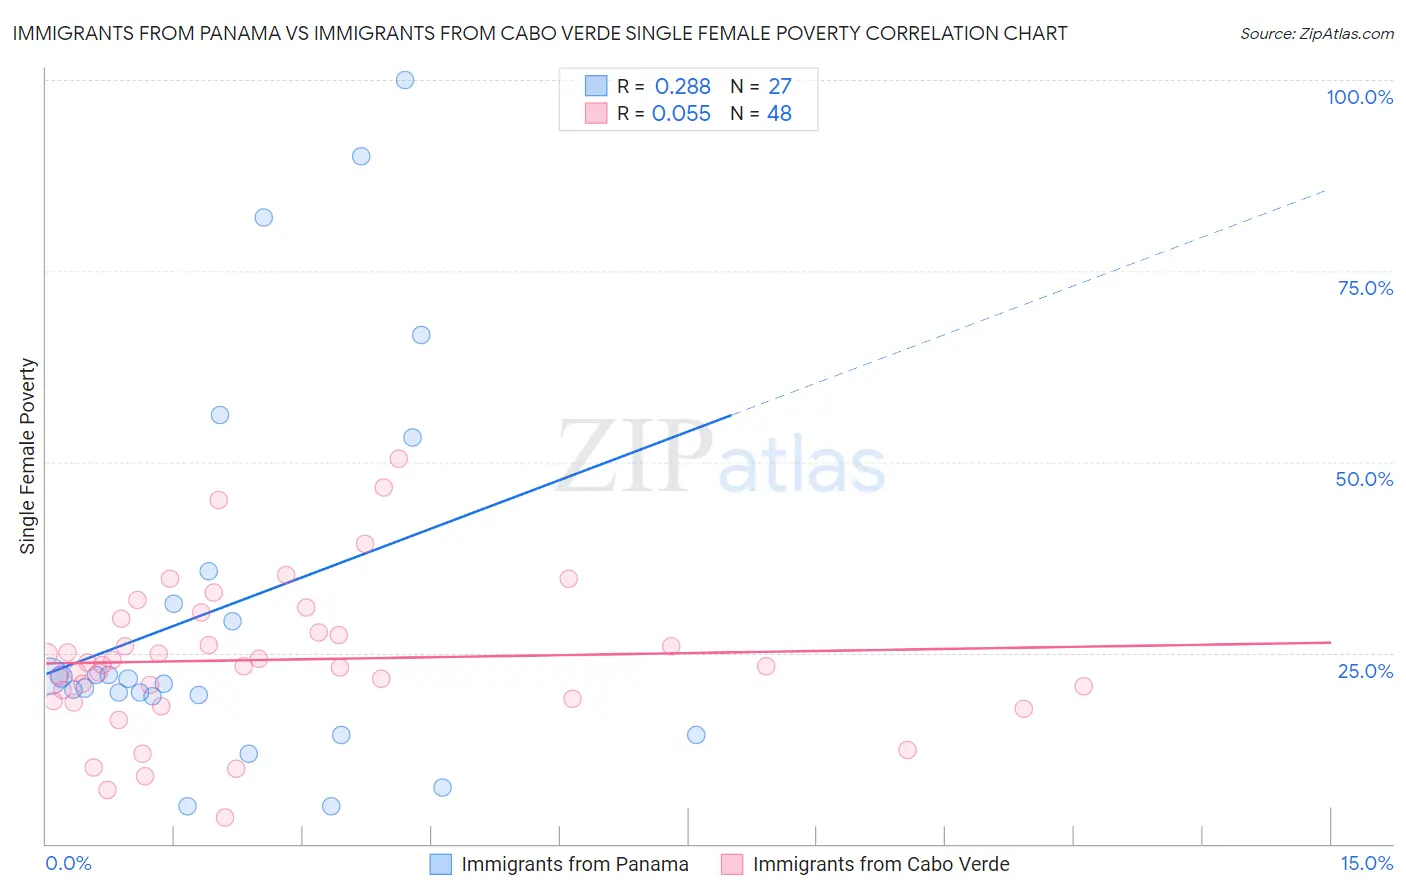 Immigrants from Panama vs Immigrants from Cabo Verde Single Female Poverty